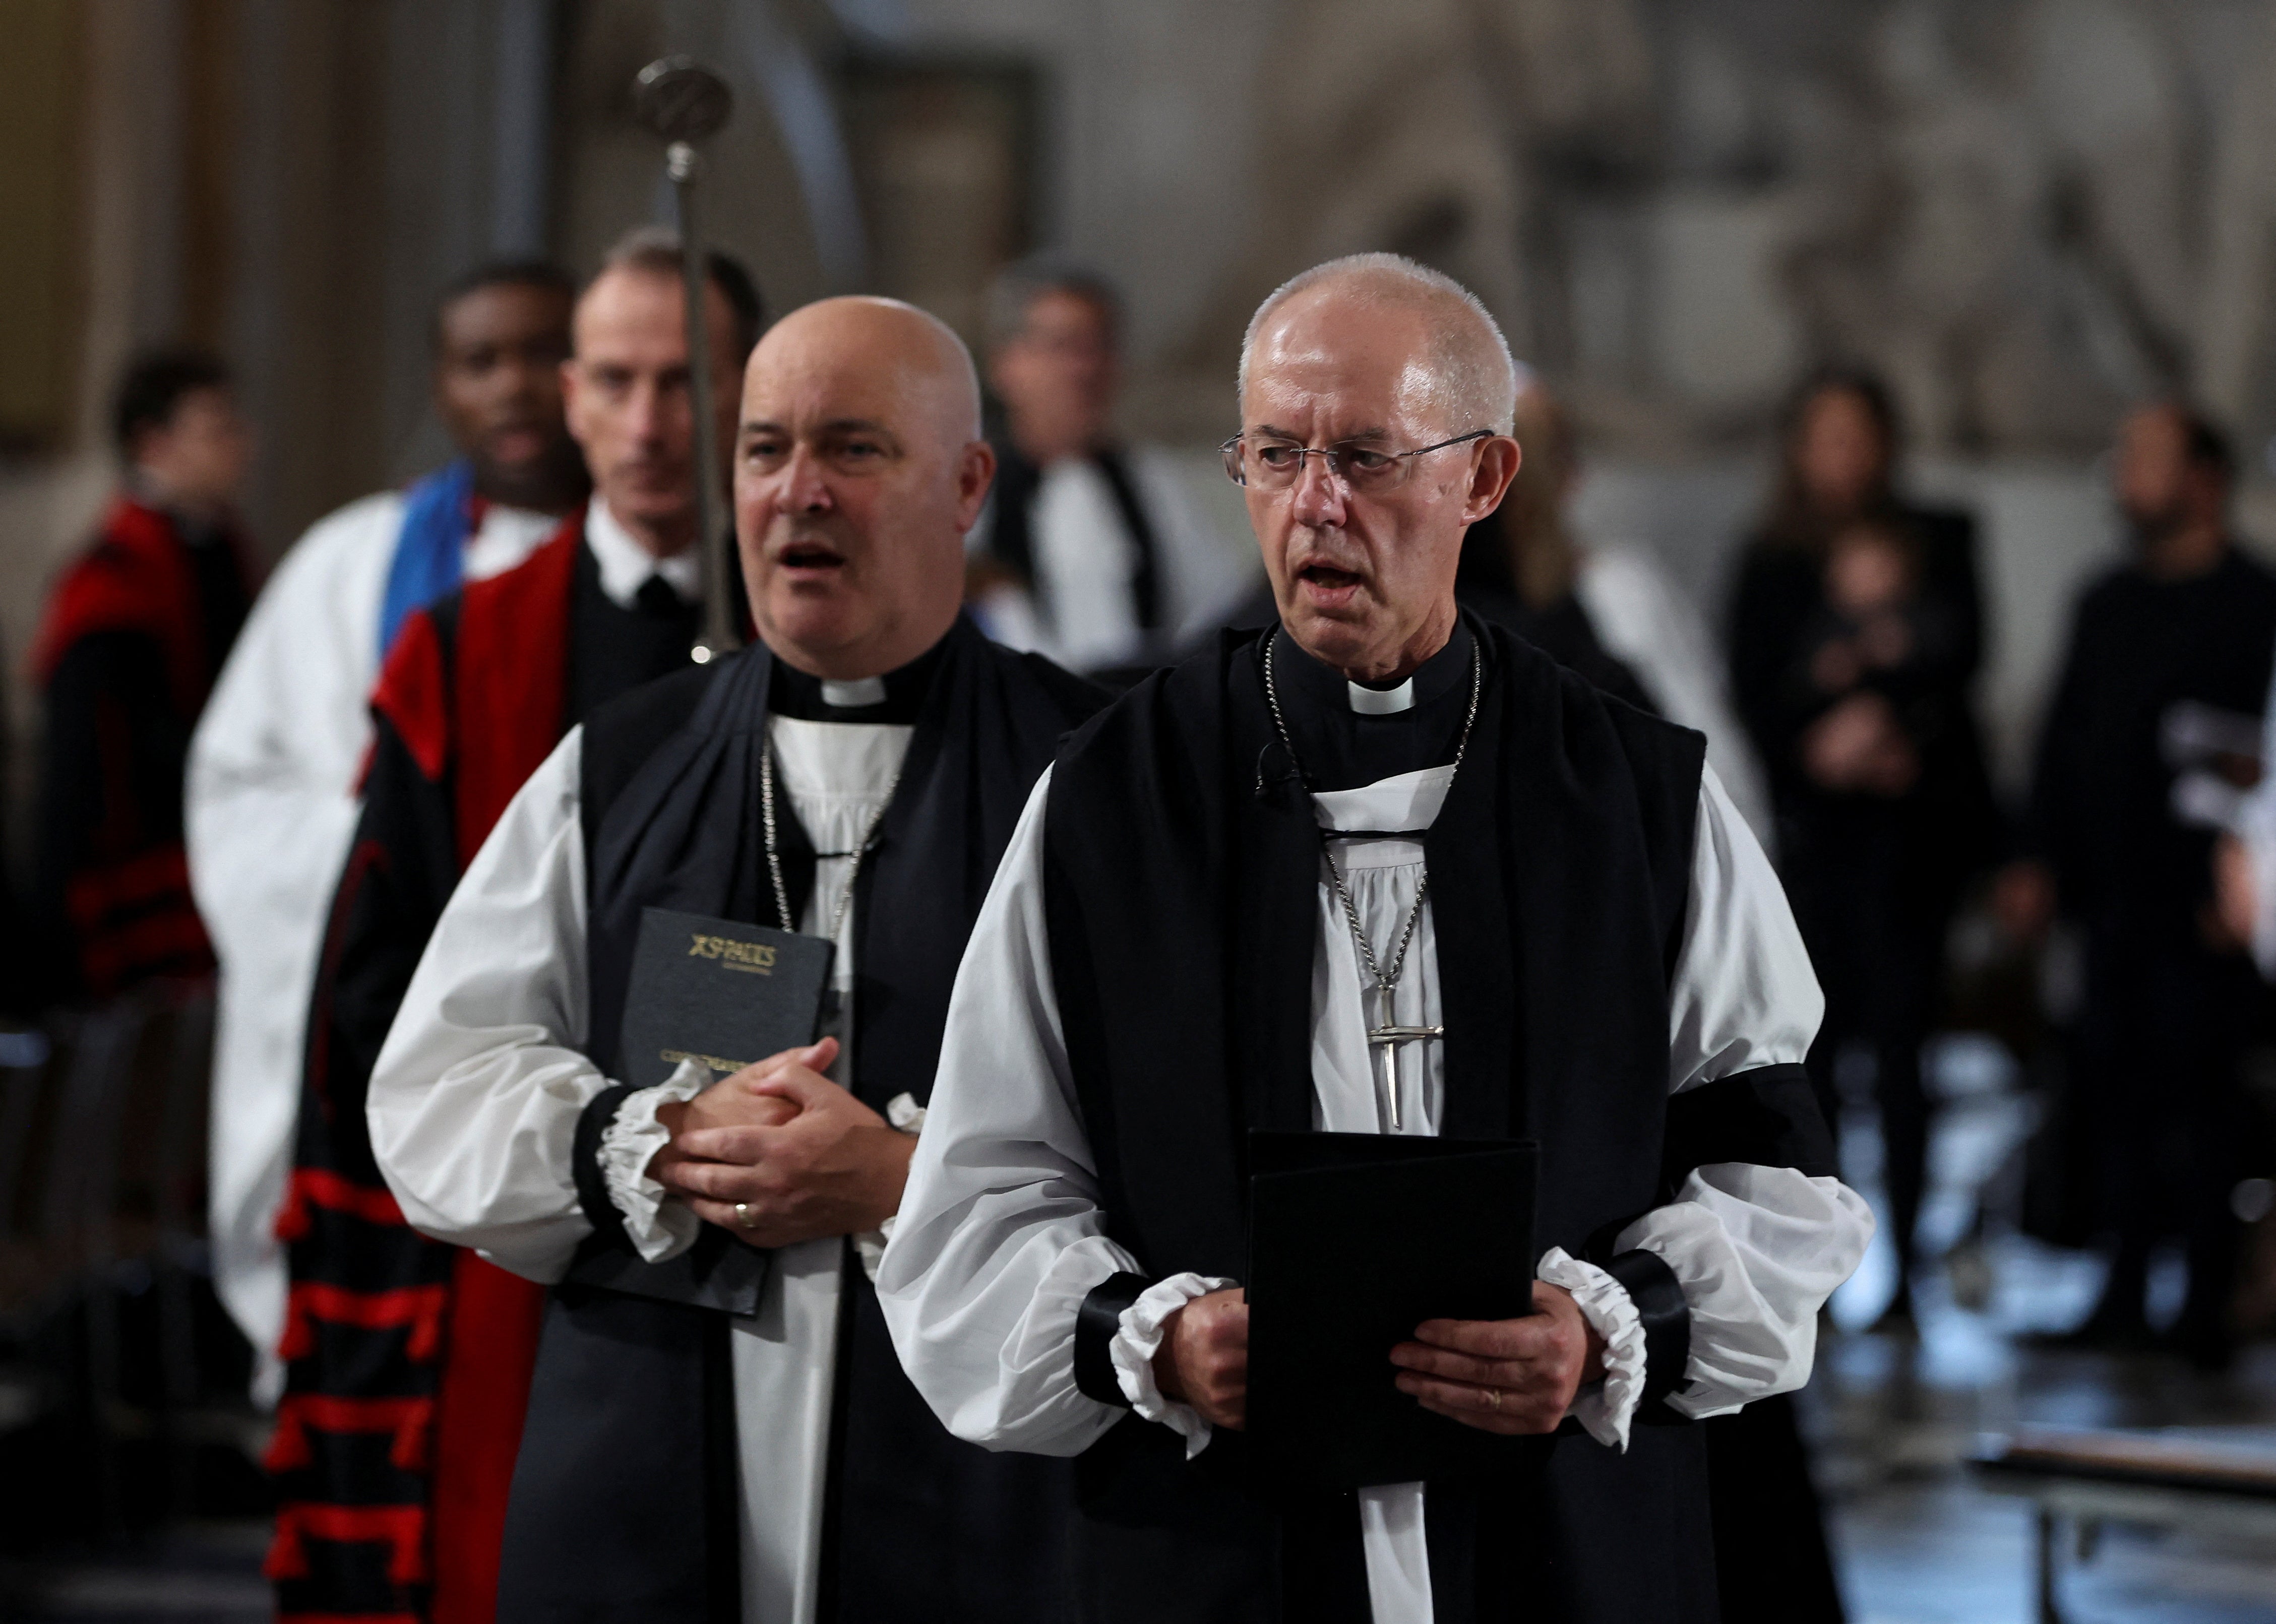 The Archbishop of Canterbury, Justin Welby (R), also attended the service